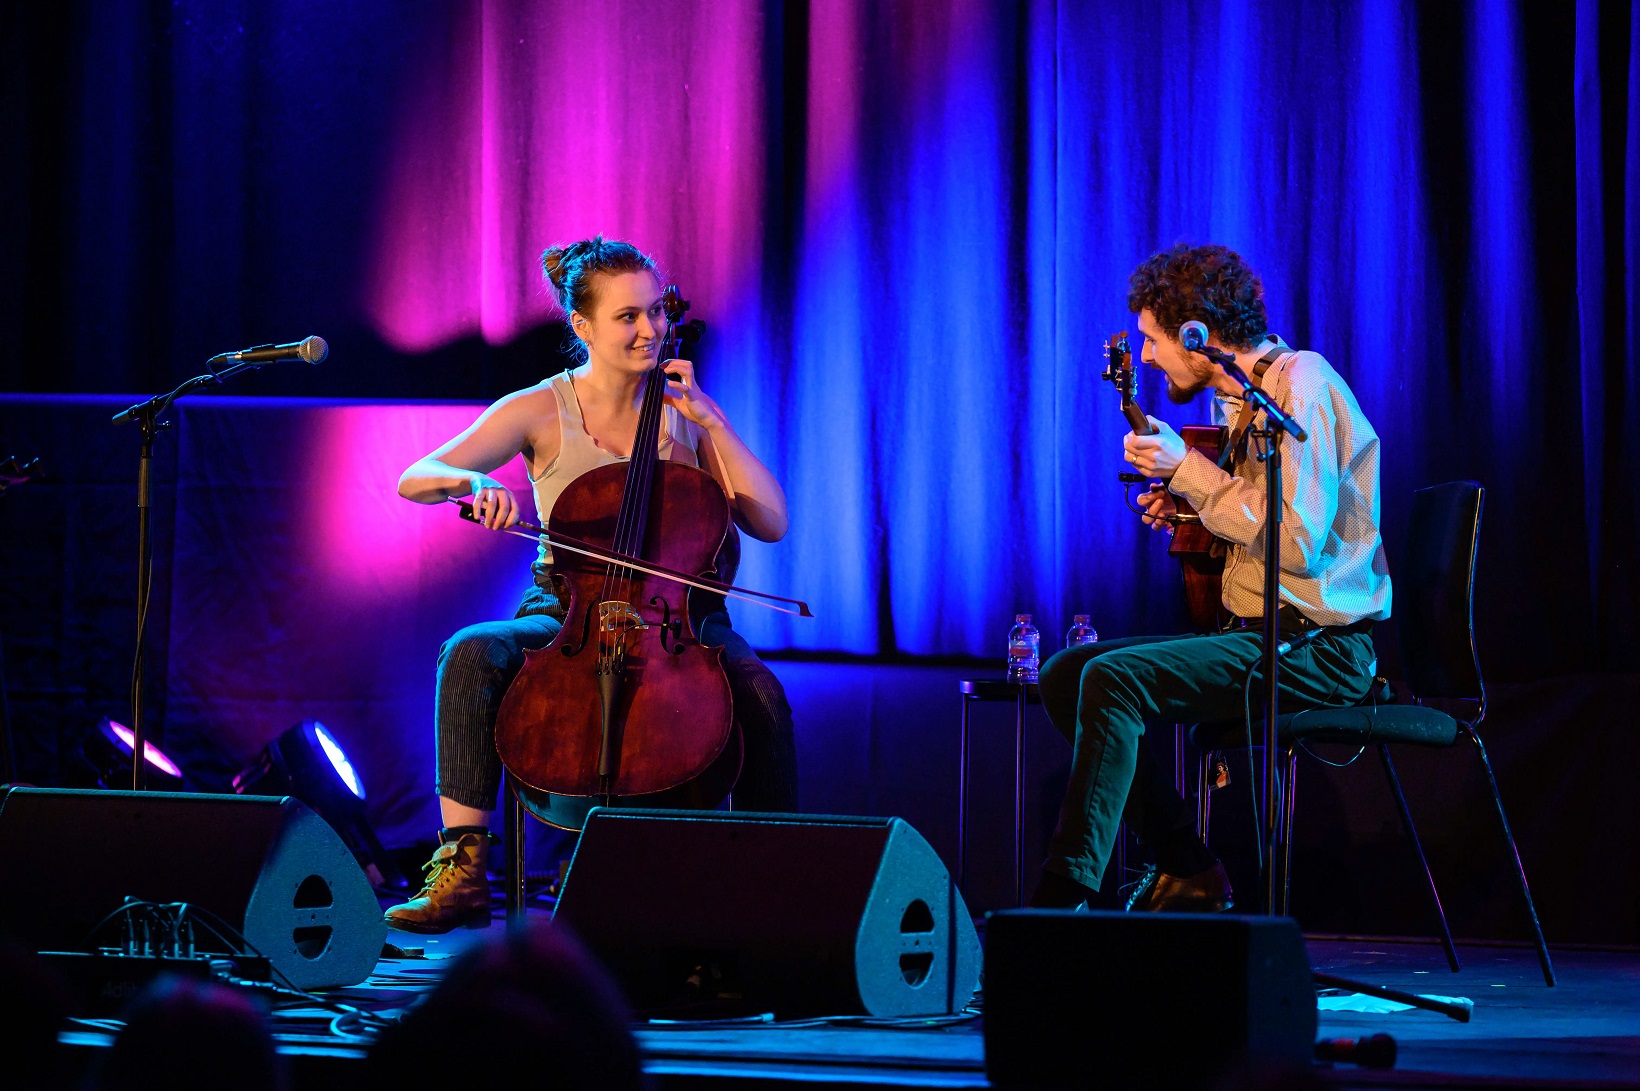 A young white woman and white man play the cello and guitar facing each other on a stage lit with pink and blue lights